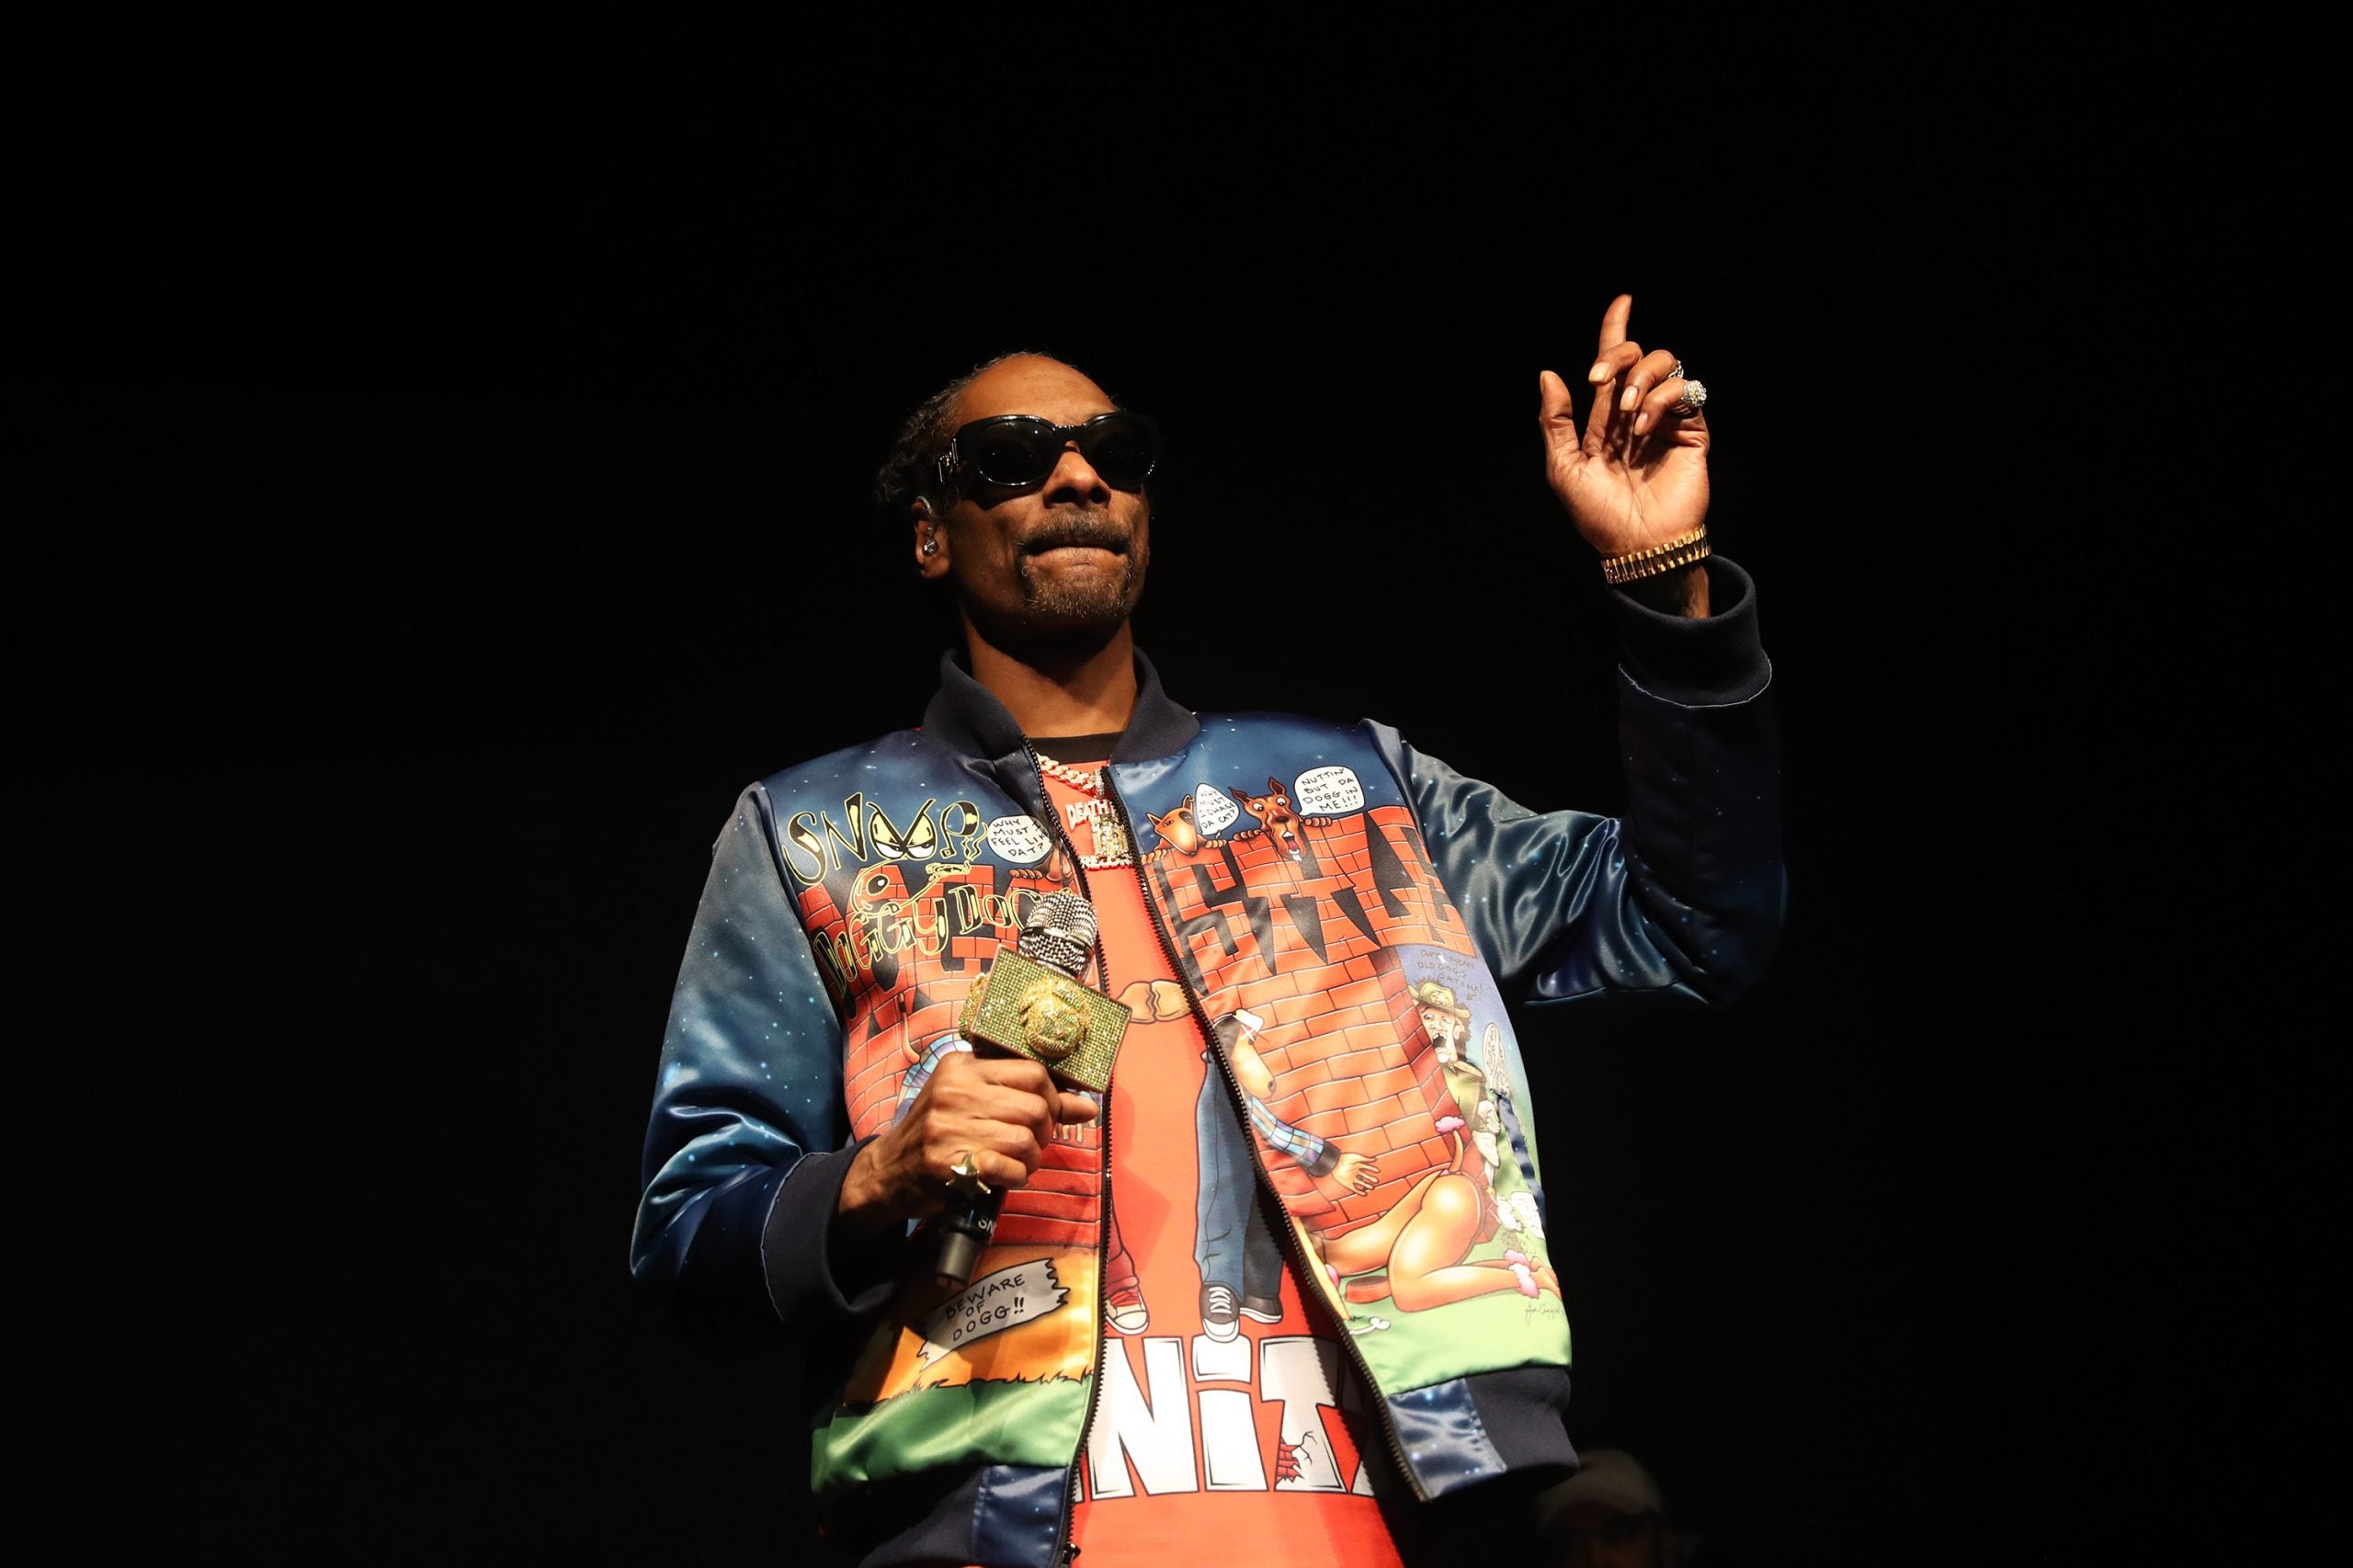 Snoop Dogg Apologizes To Gayle King For ‘Disrespectful’ Rant